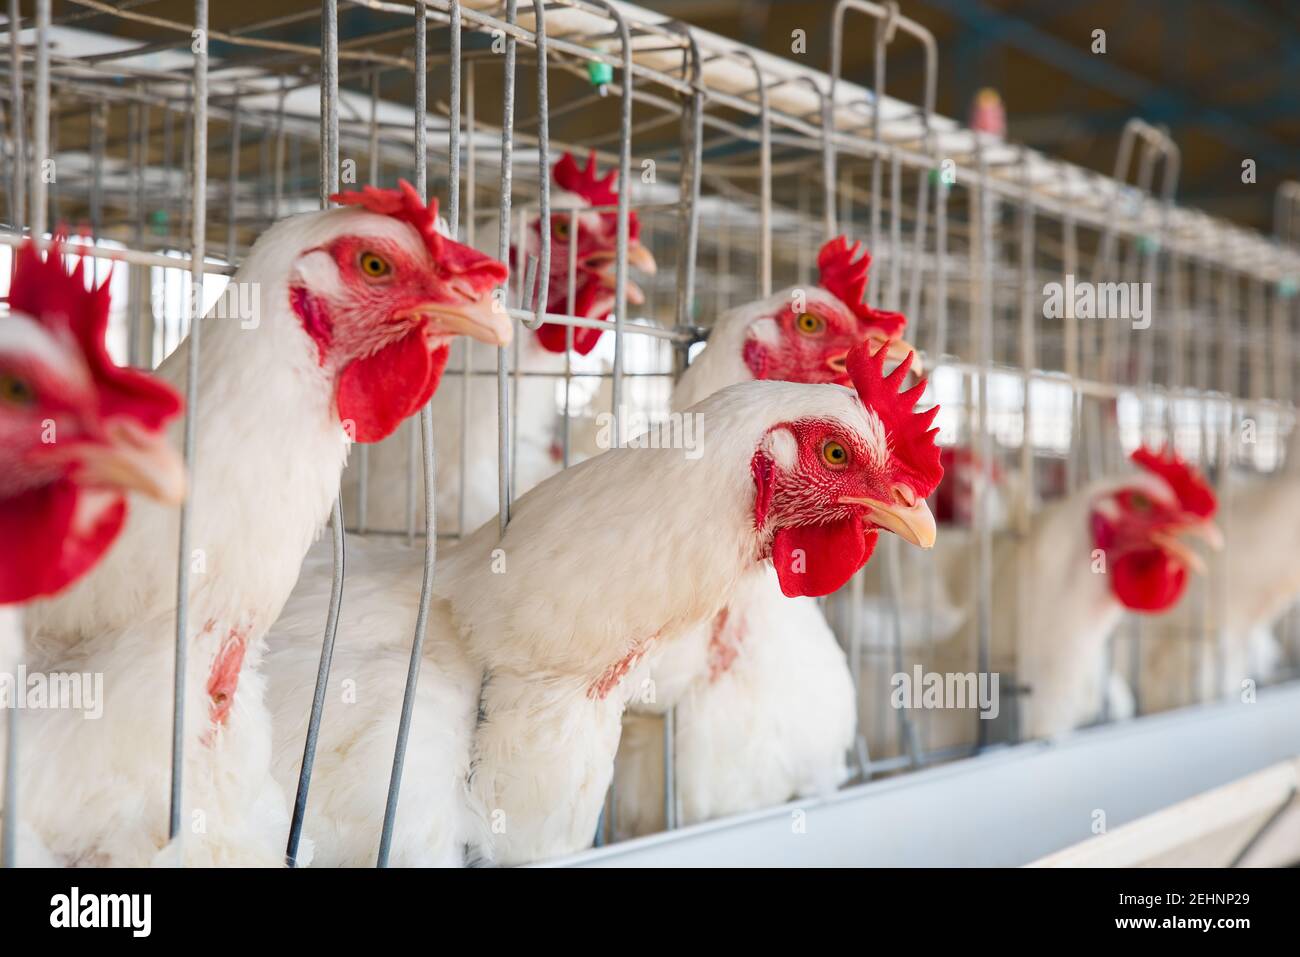 Chicken in a Cage at Poultry Farm Stock Photo